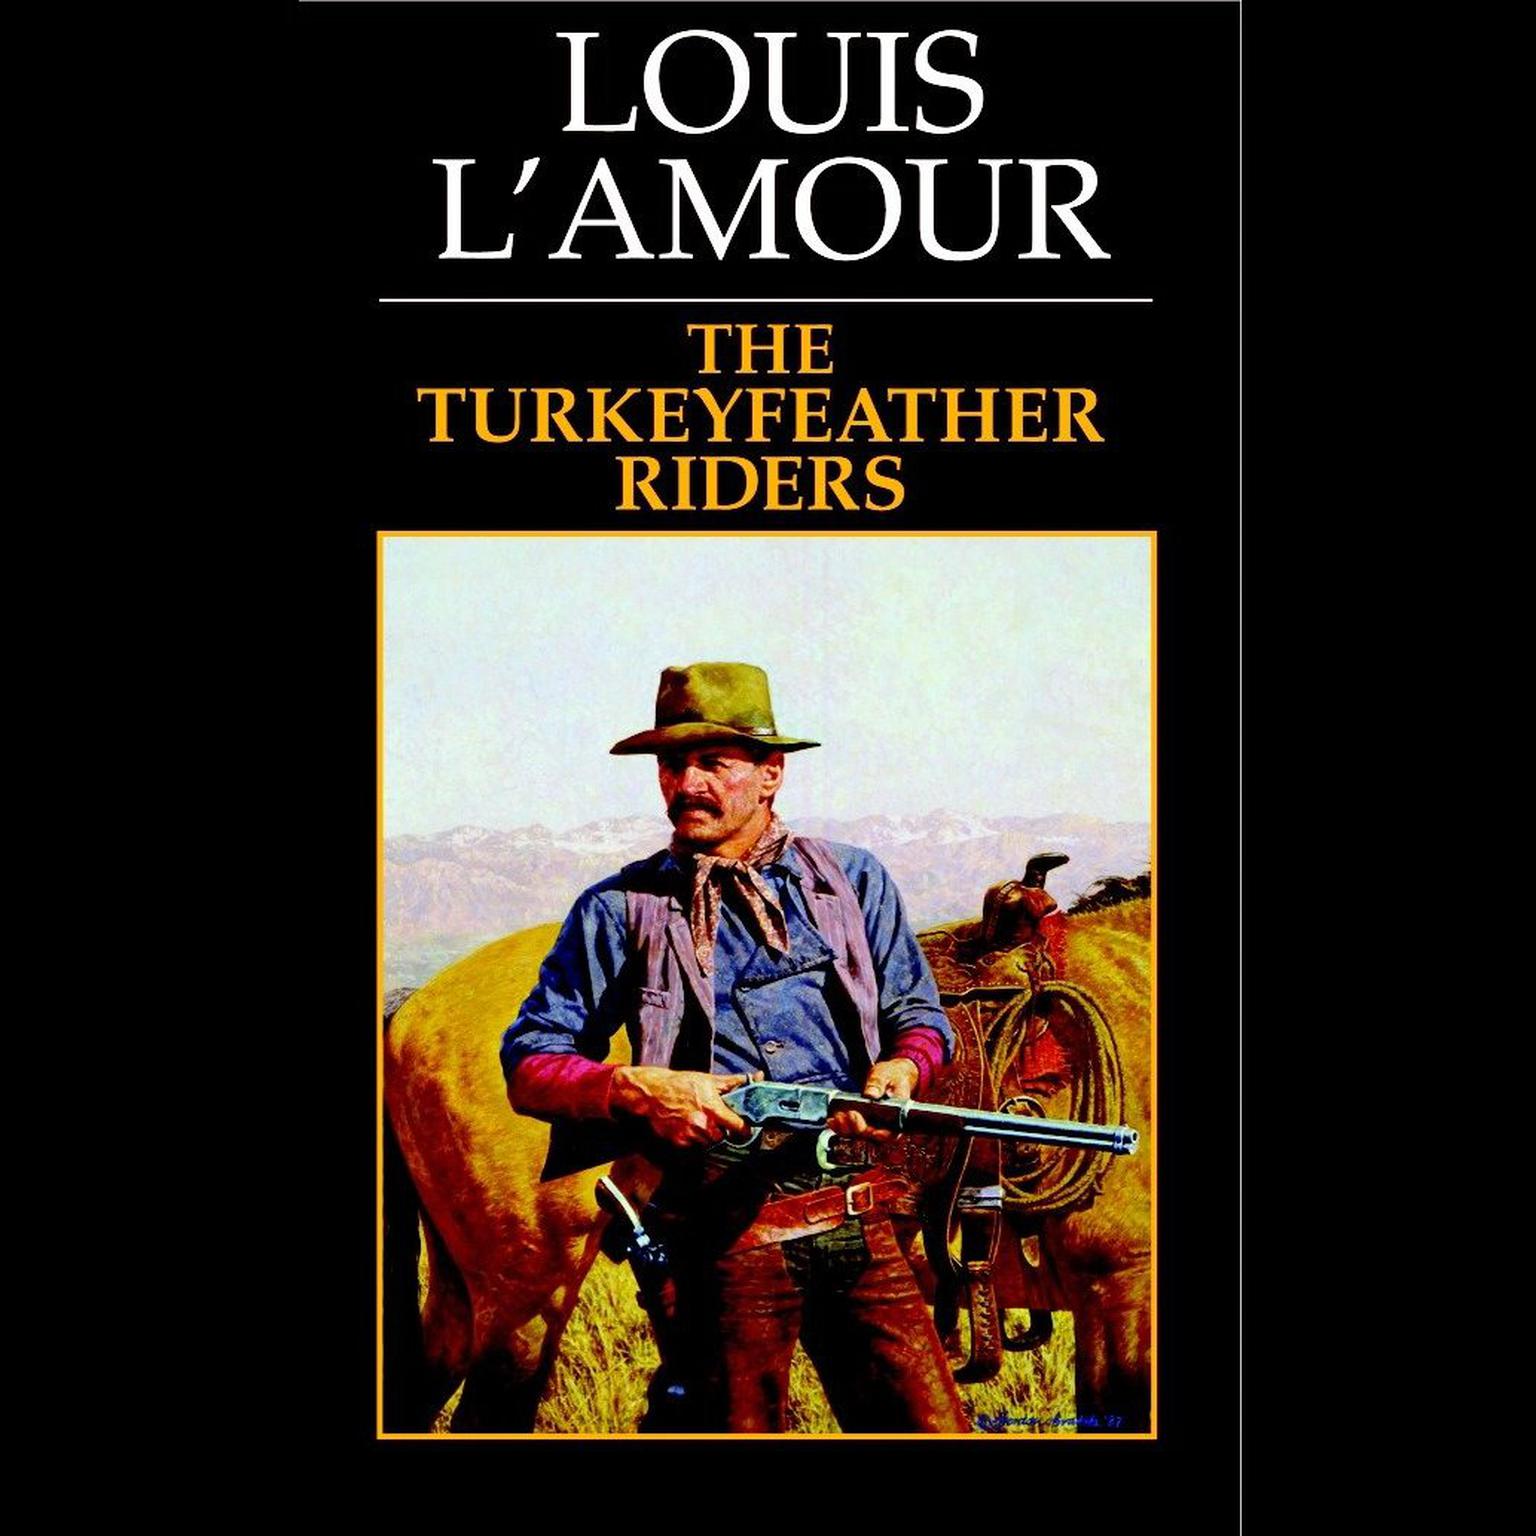 Turkeyfeather Riders (Abridged) Audiobook, by Louis L’Amour